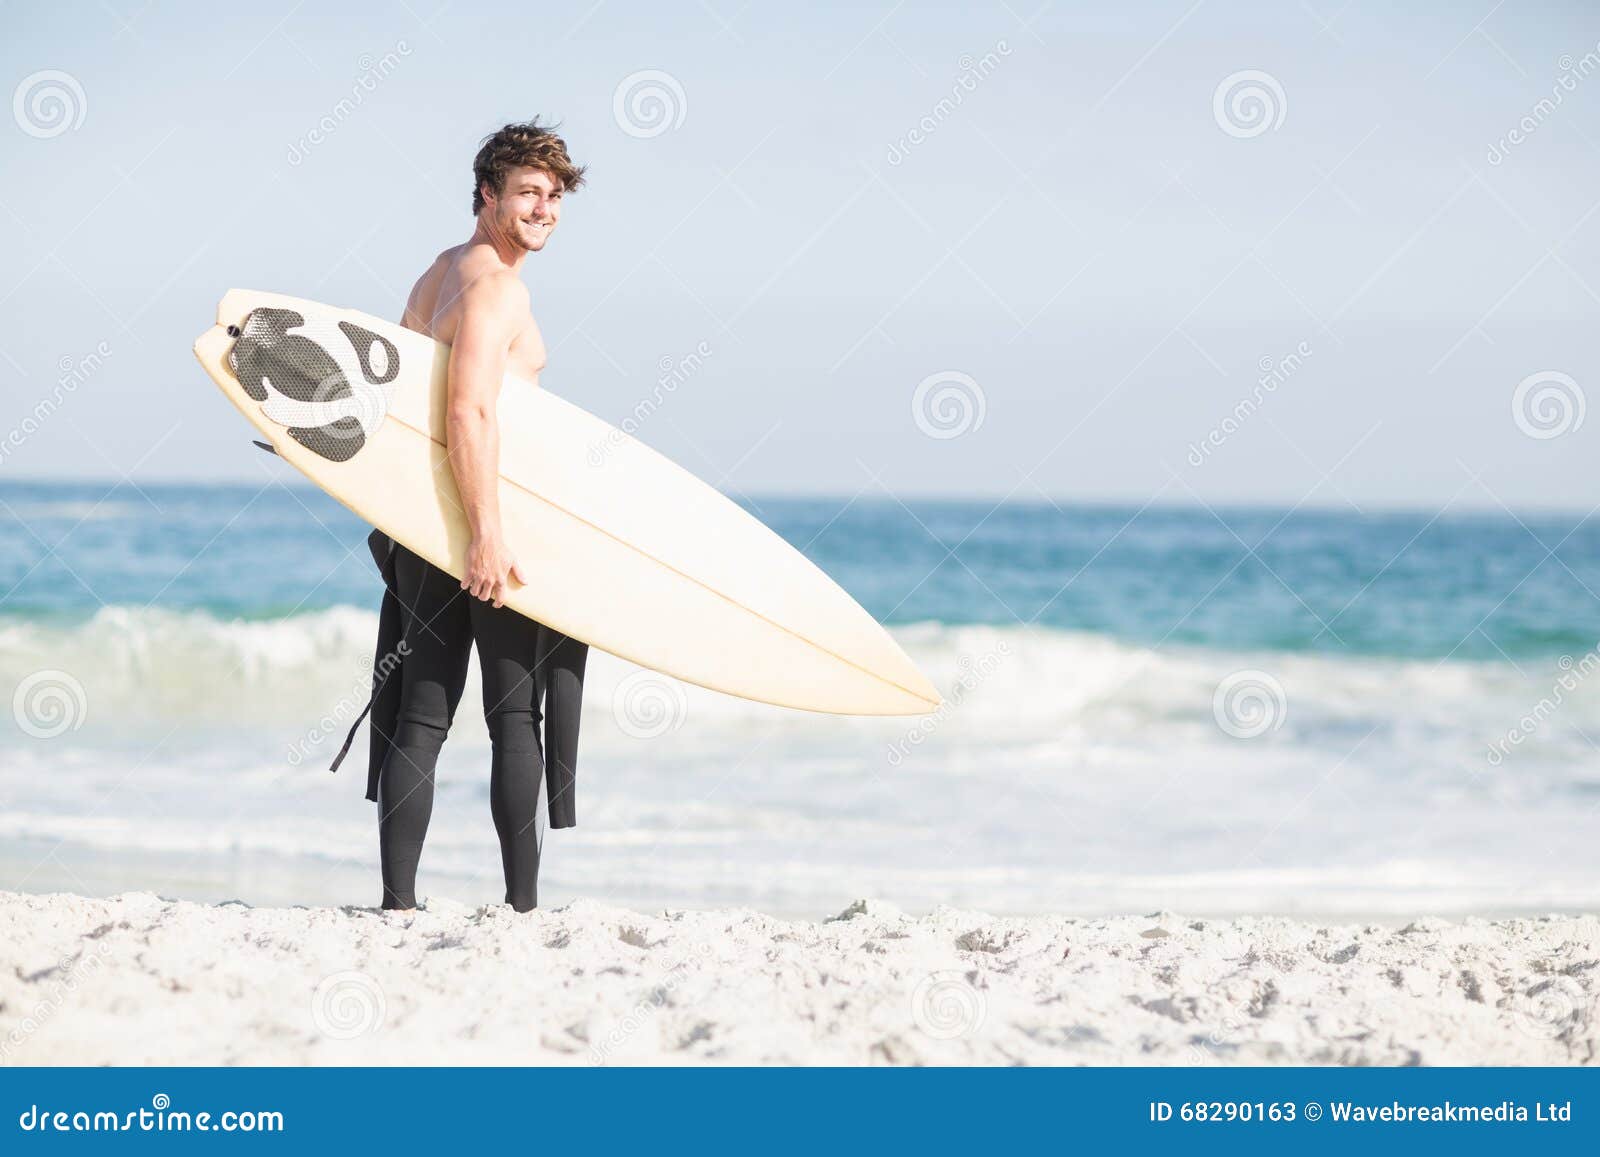 Surfer Walking on the Beach with a Surfboard Stock Image - Image of ...